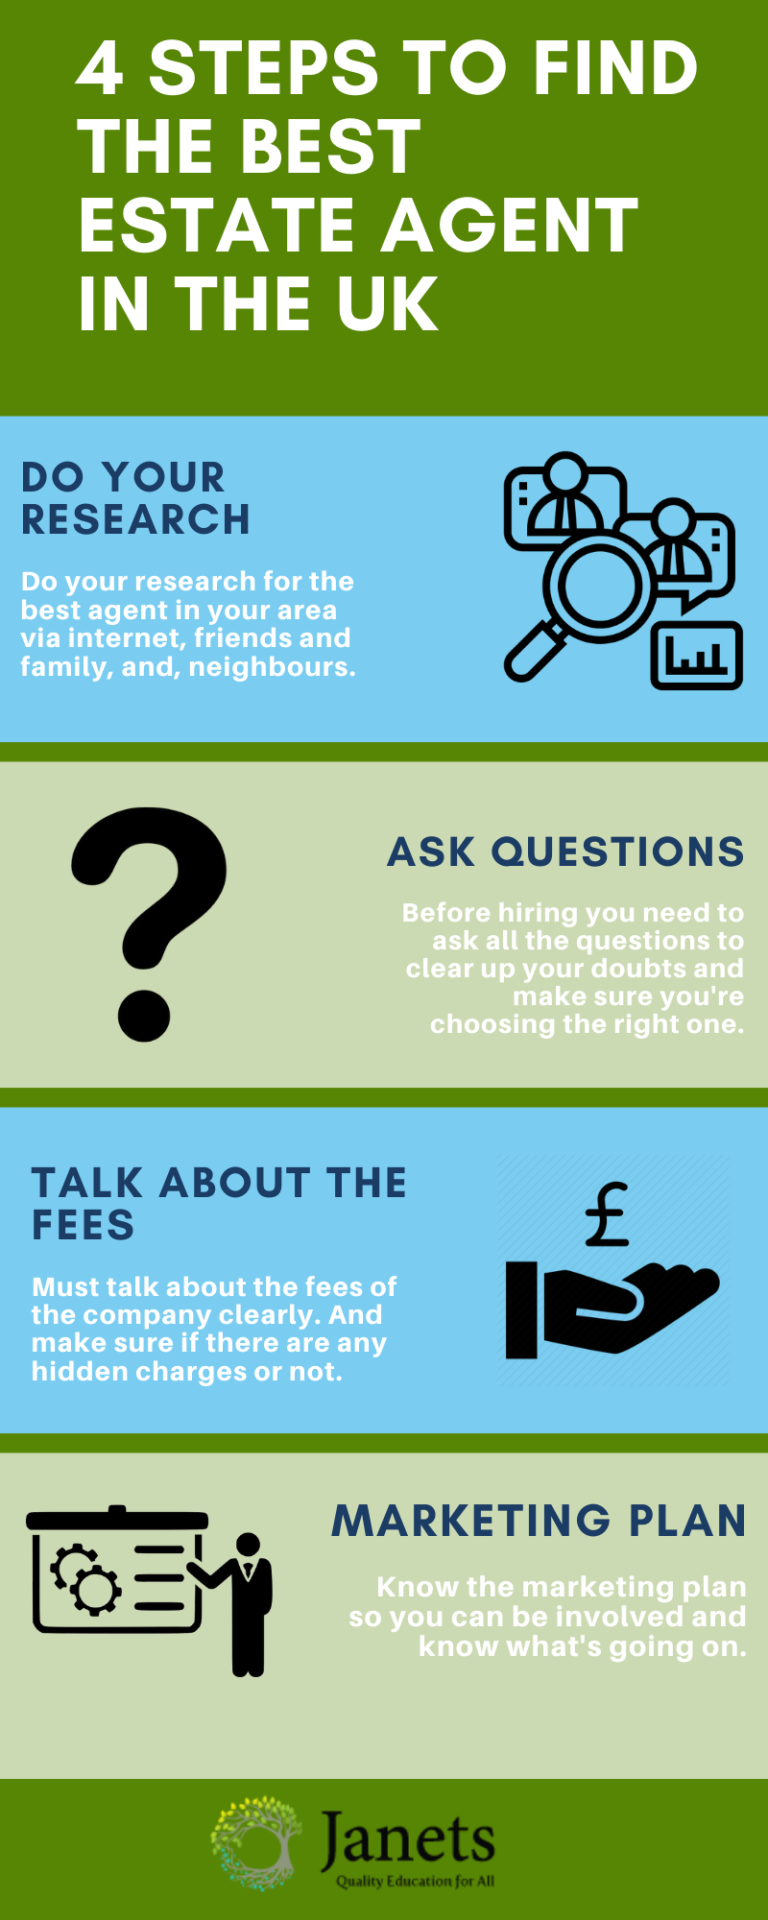 How to find the best real estate agent in the UK 4 easy steps